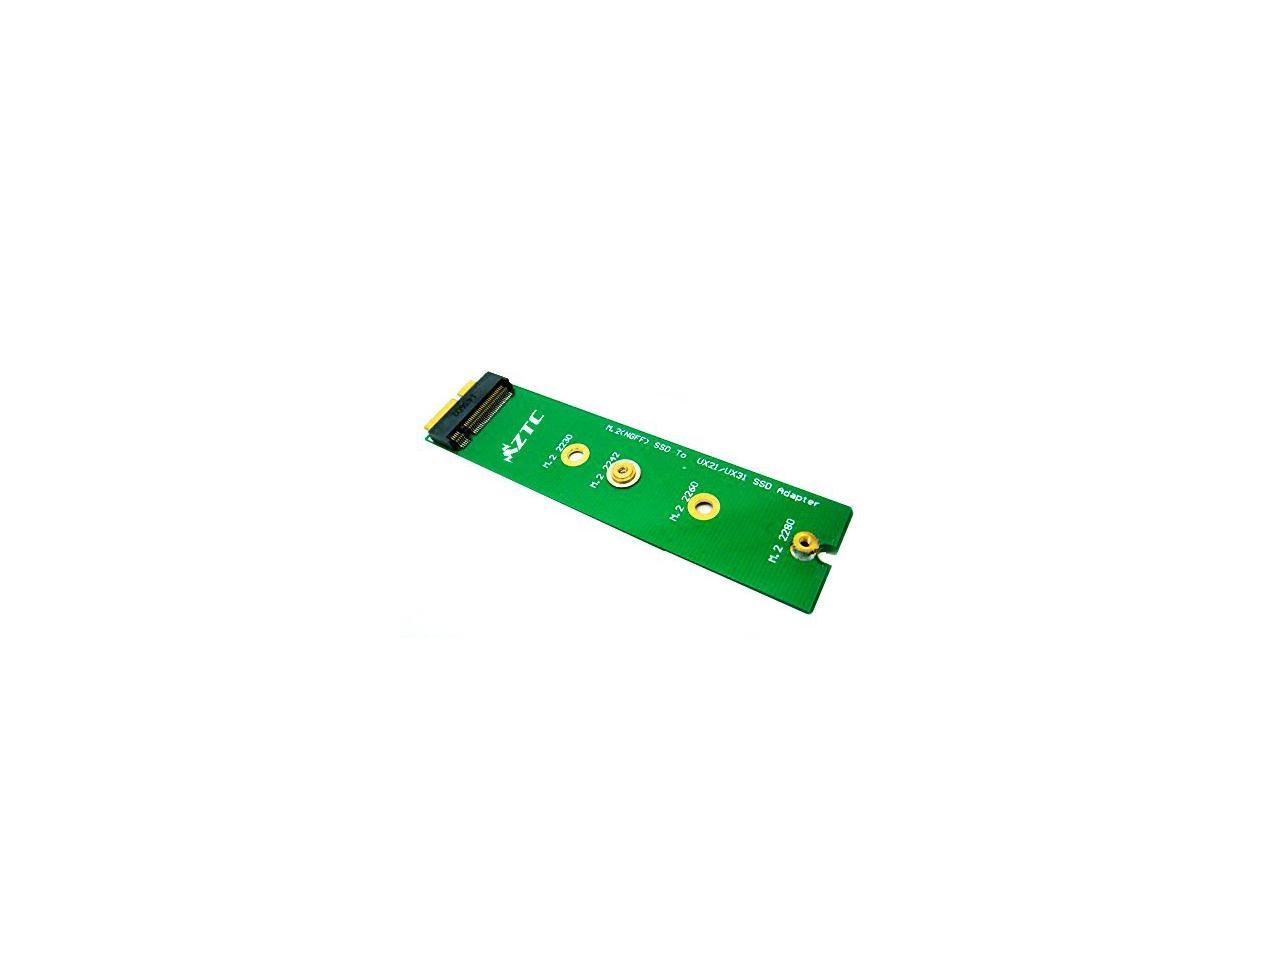 ZTC Thunder Board NGFF M.2 M or B Key SSD to 18Pin. Replacement For Sandisk U100 Series SDSA5JK and ADATA XM11 all sizes SSD in Asus UX31 UX21 Zenbook. Model ZTC-AD003